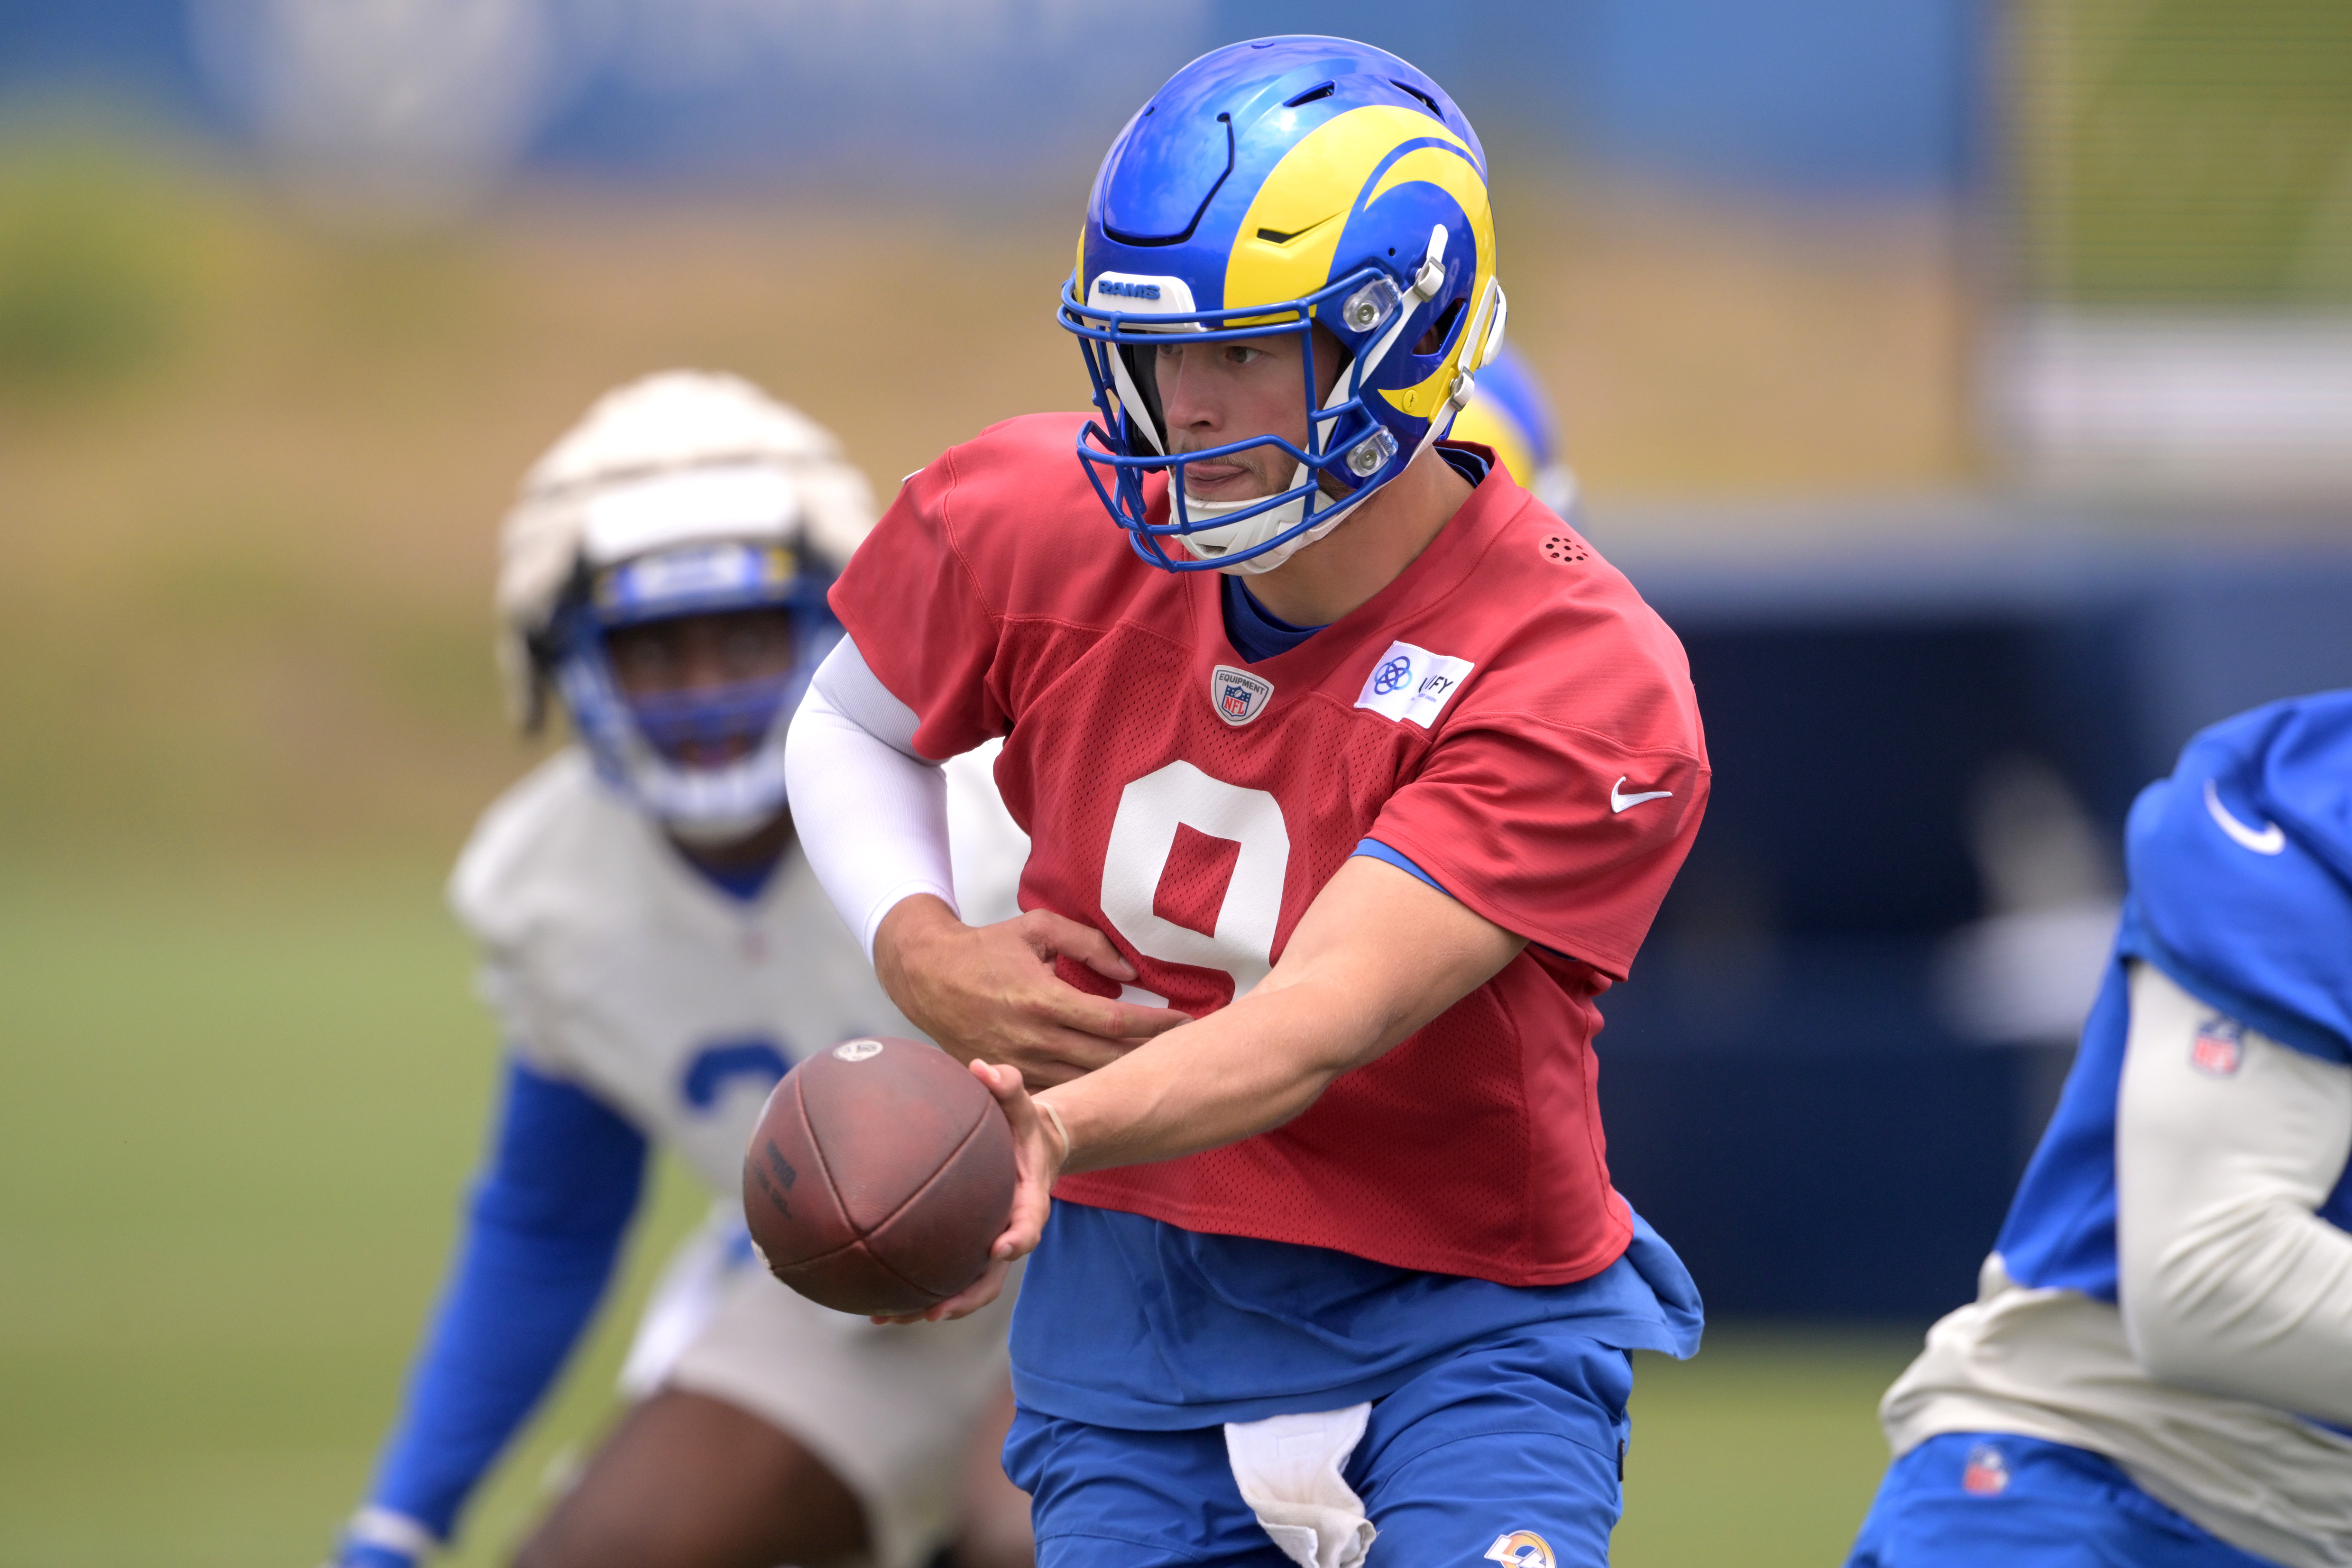 Quarterback Matthew Stafford of the Los Angeles Rams participates in drills during mini-camp at California Lutheran University on June 13, 2023 in Thousand Oaks, California.